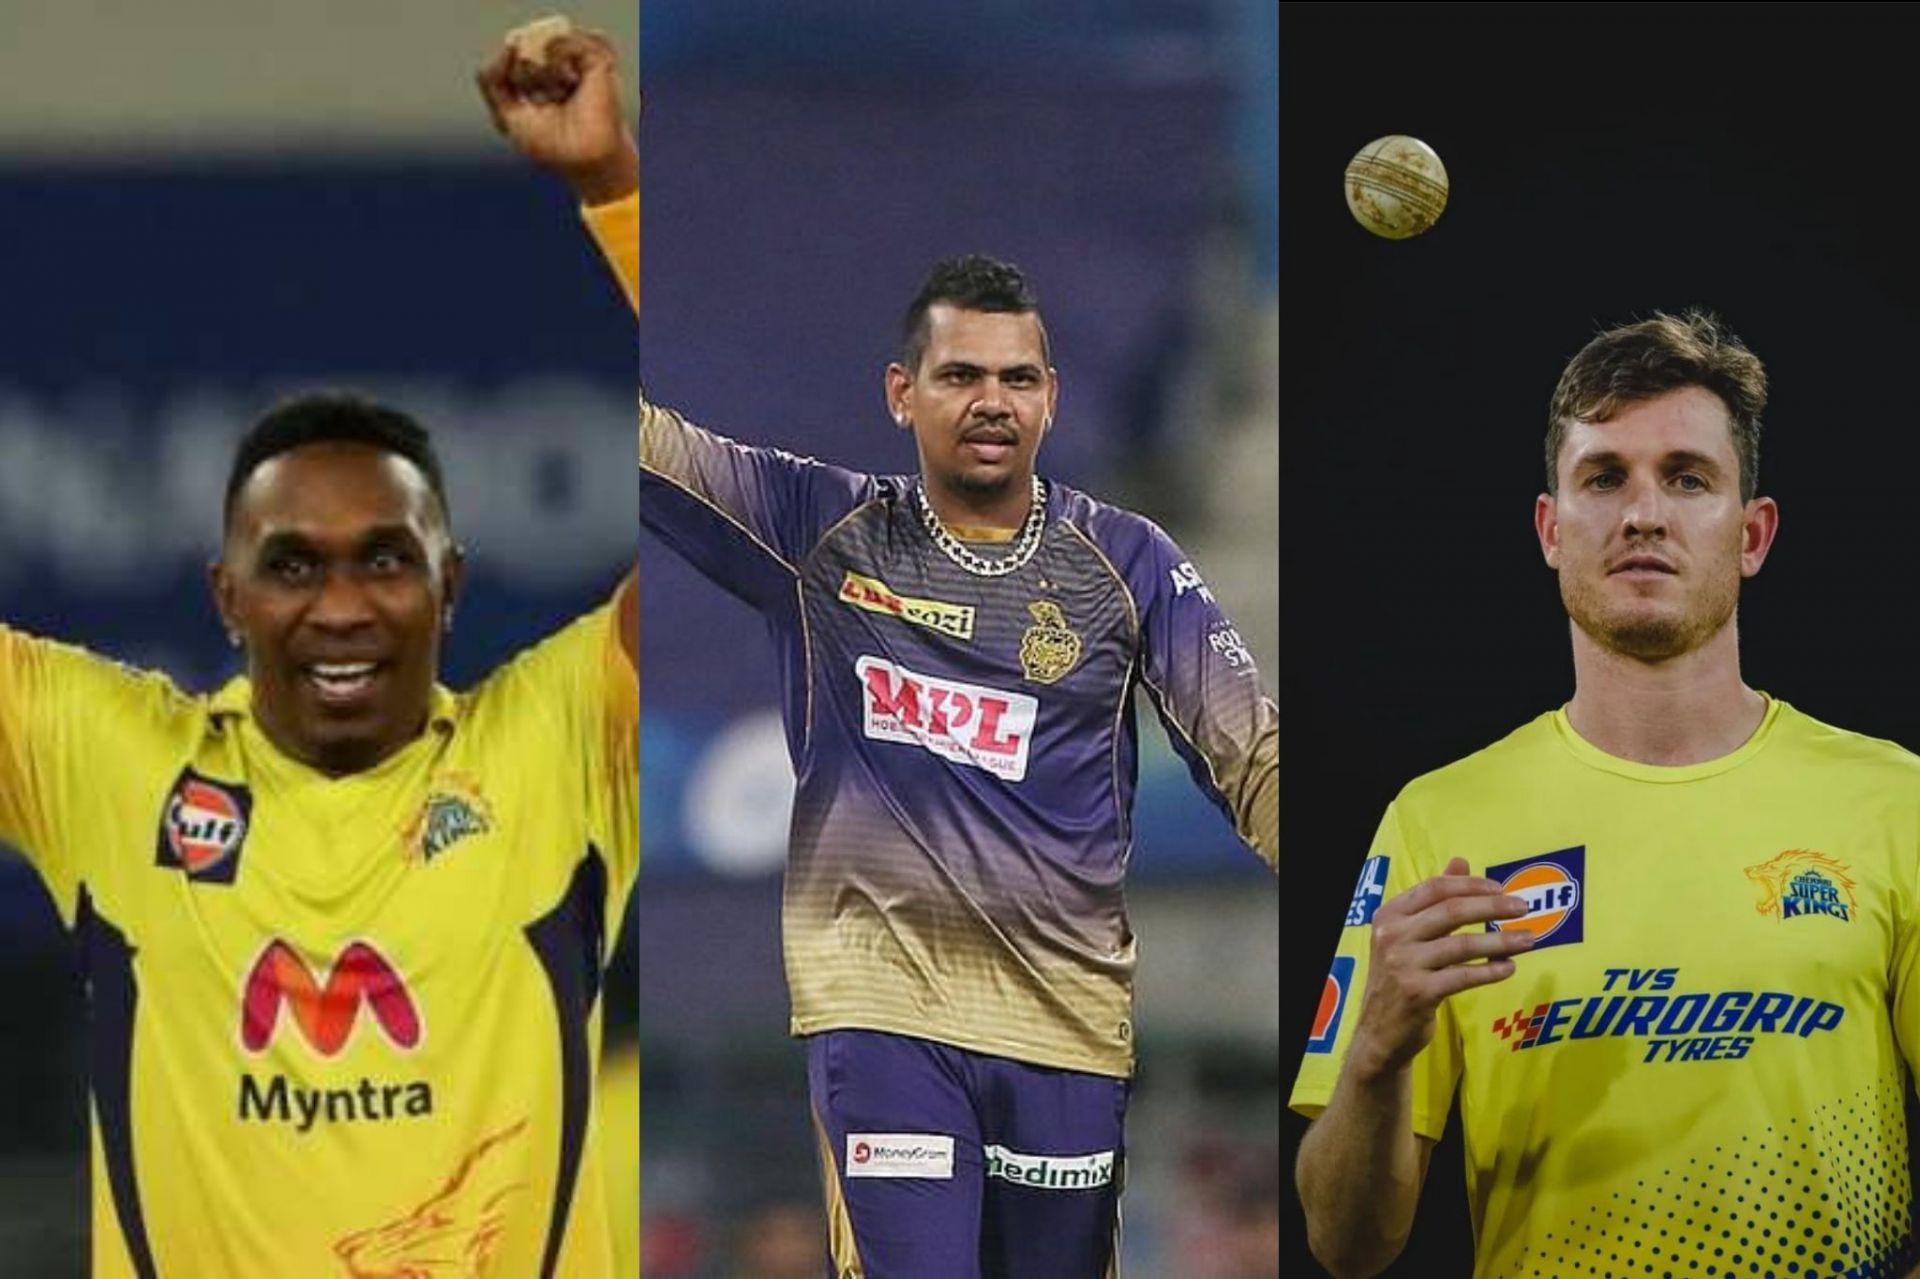 The opening IPL 2022 game between CSK and KKR will see many big match stats